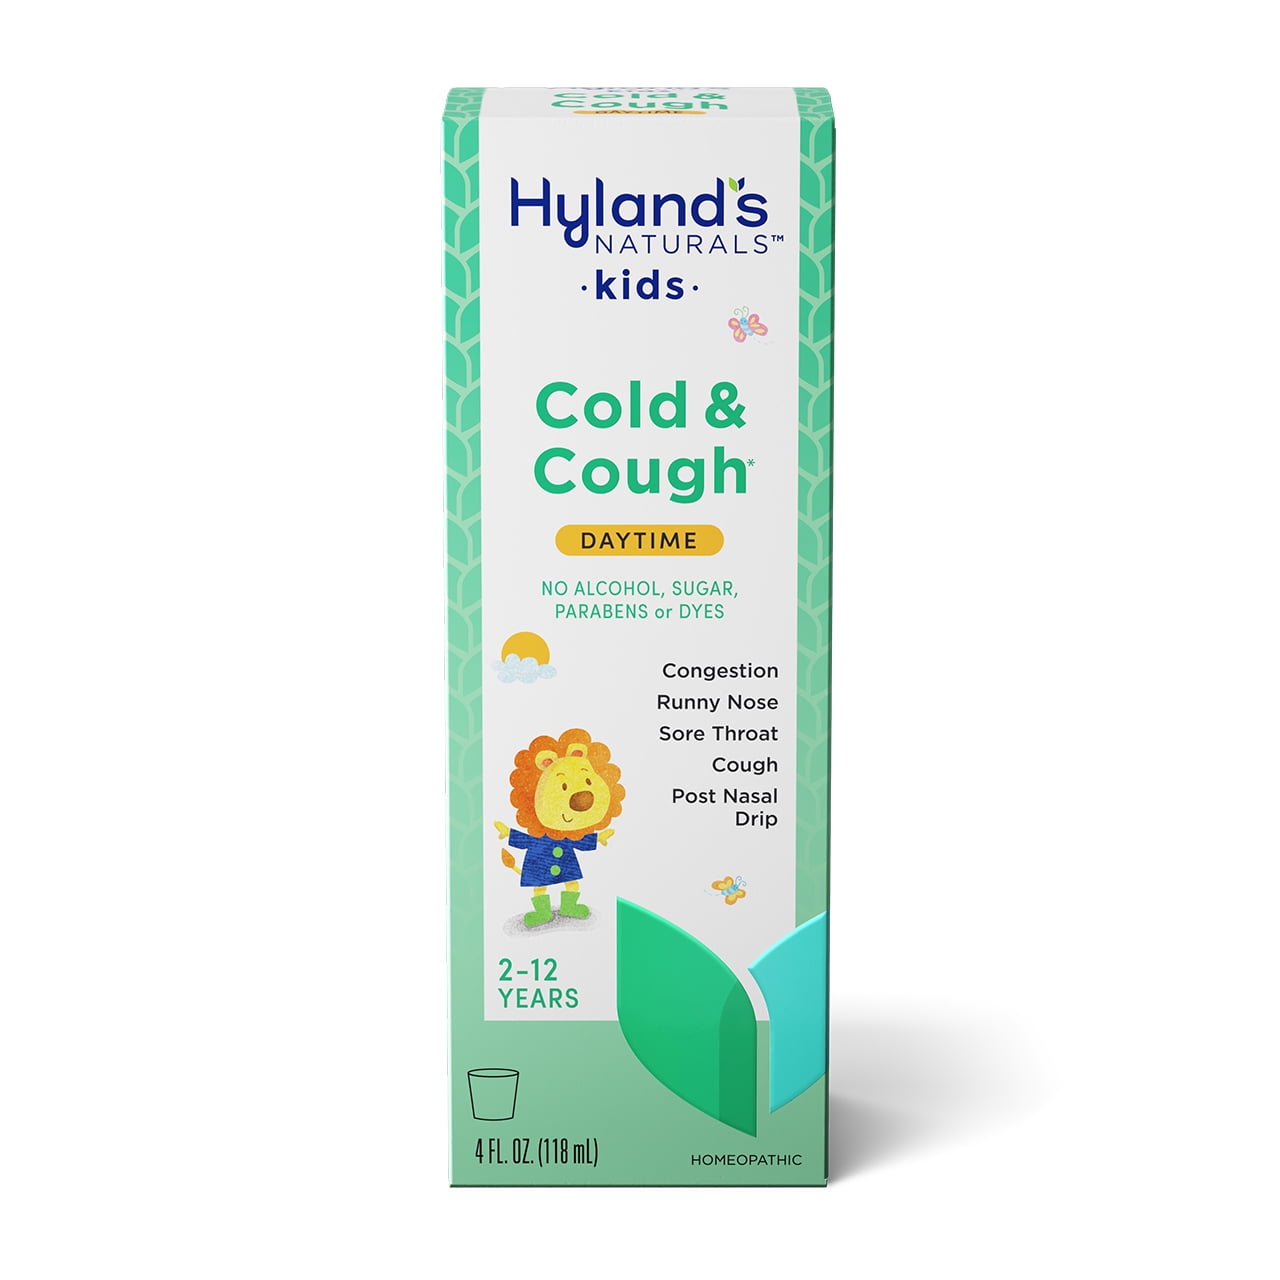 Hyland's Naturals Kids Cold & Cough Relief Liquid, Natural Relief of Common Cold Symptoms, 4 Ounces